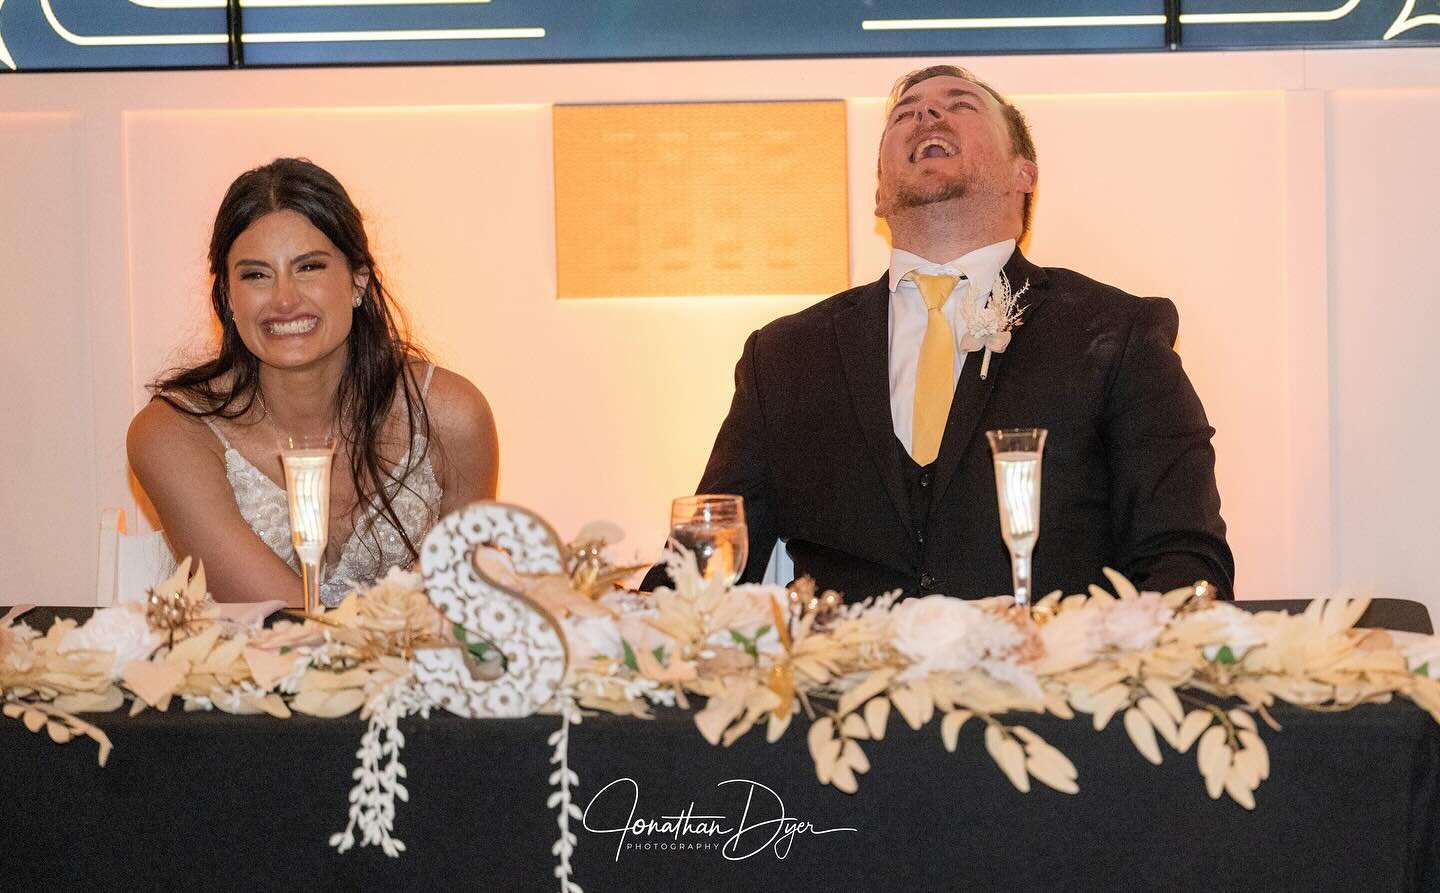 Get yourself a partner you can laugh with. 😍 #NationalLetsLaughDay 

Photo | @jdyerphoto
Planning | @dayofdetailscoordination 
Venue | @historystpete